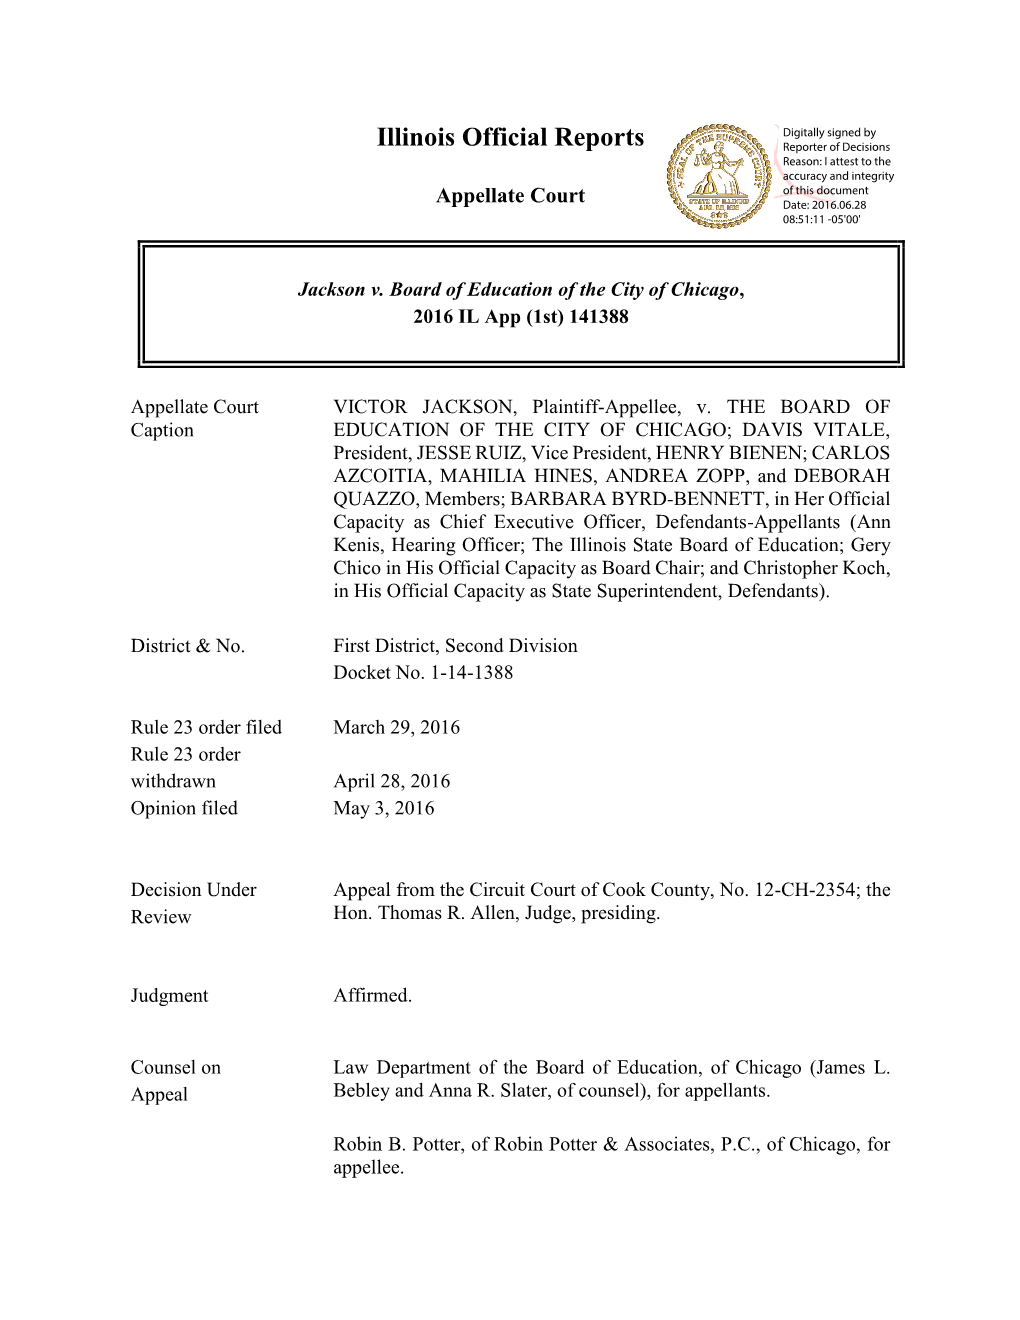 Jackson V. Board of Education of the City of Chicago, 2016 IL App (1St) 141388